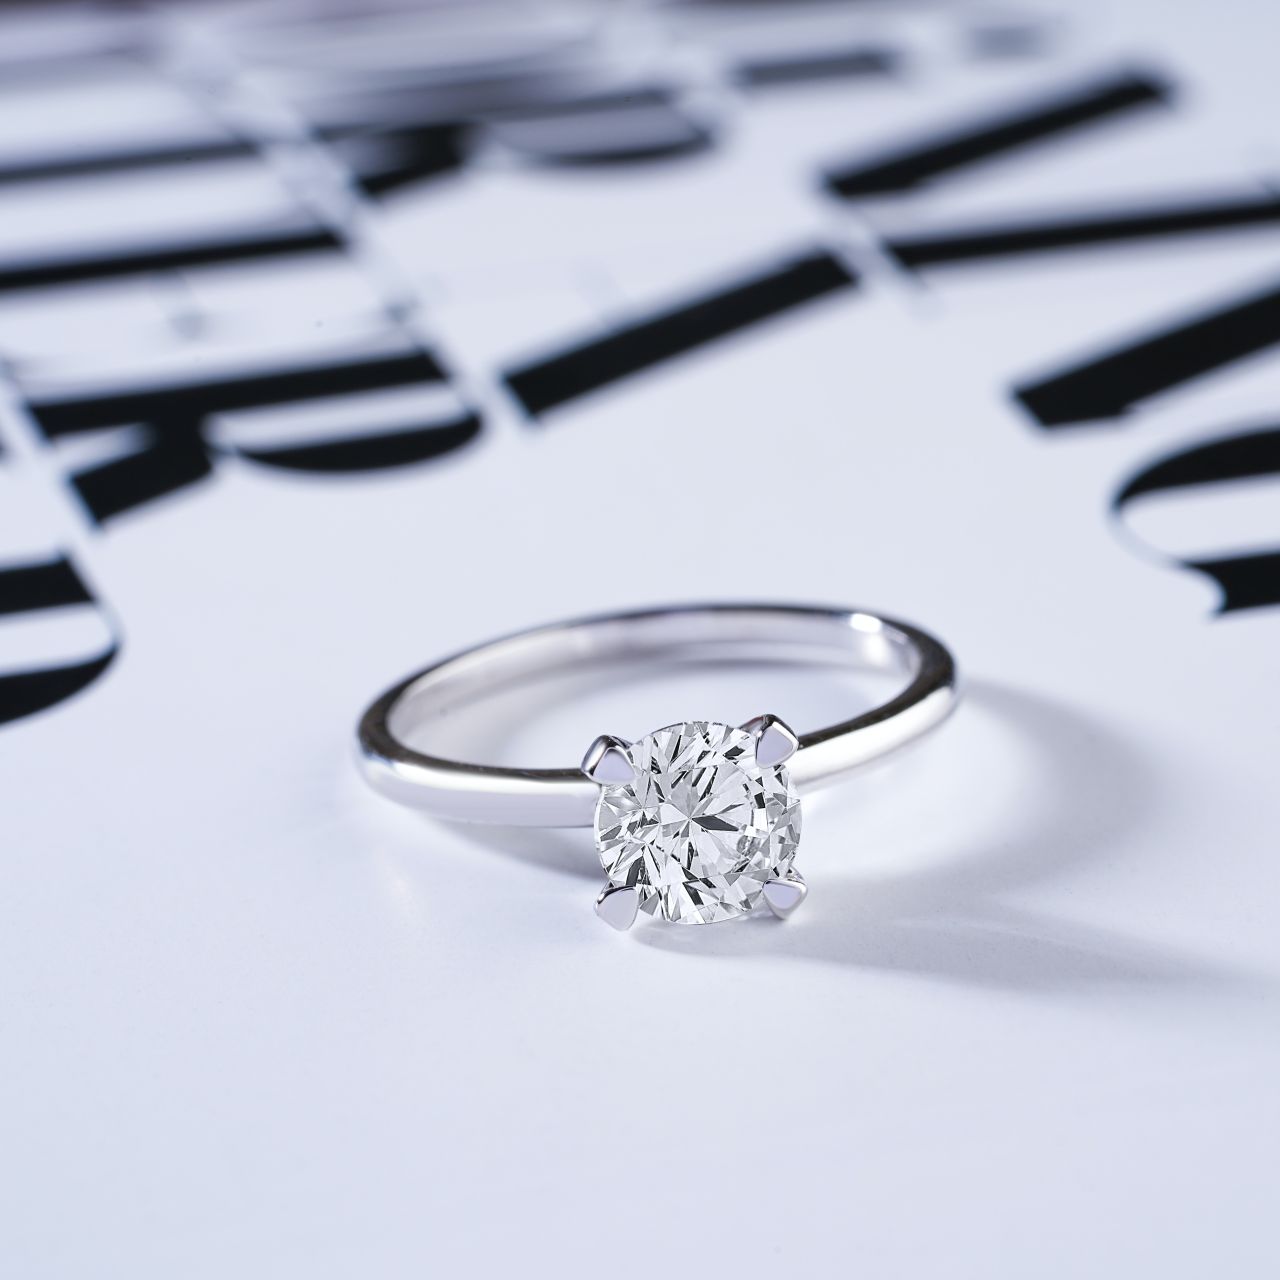 How Can You Tell If A Diamond Ring Is Good